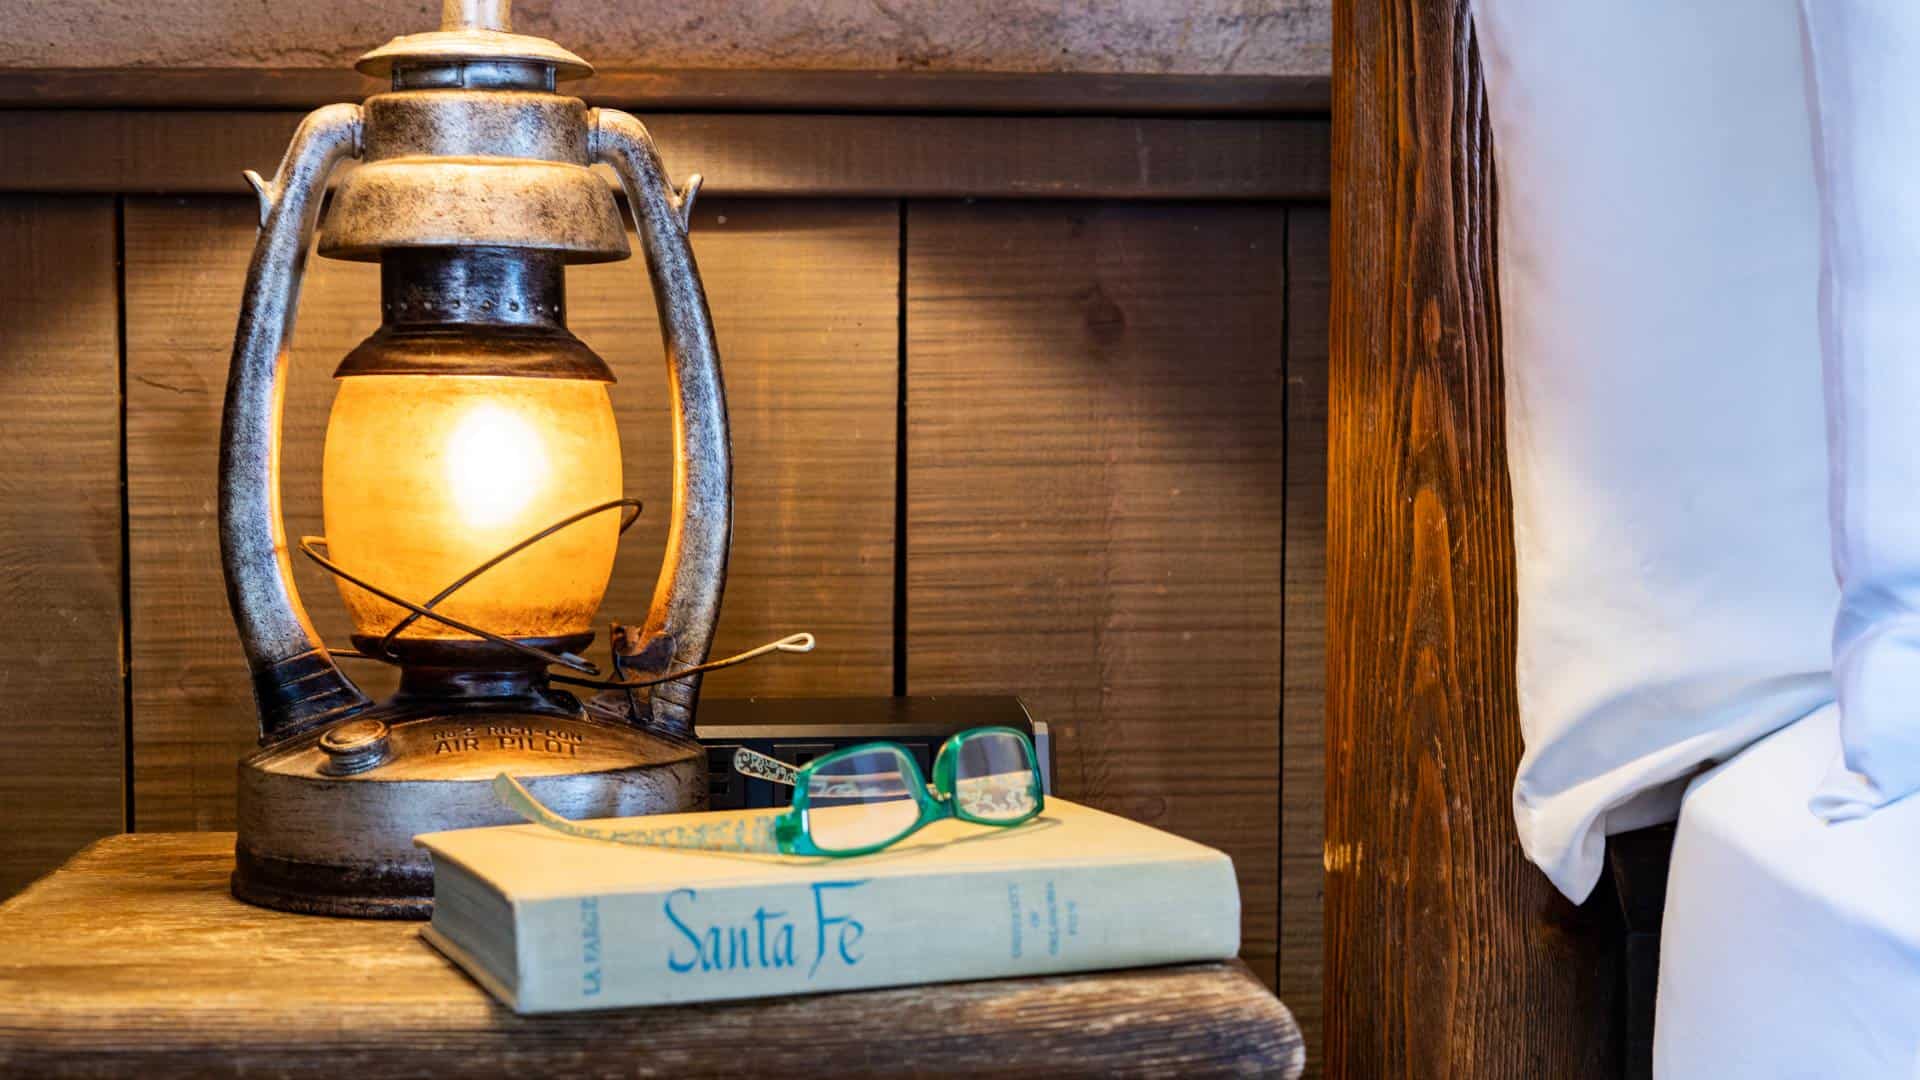 Close up view of wooden nightstand with antique book, antique lantern and green reading glasses